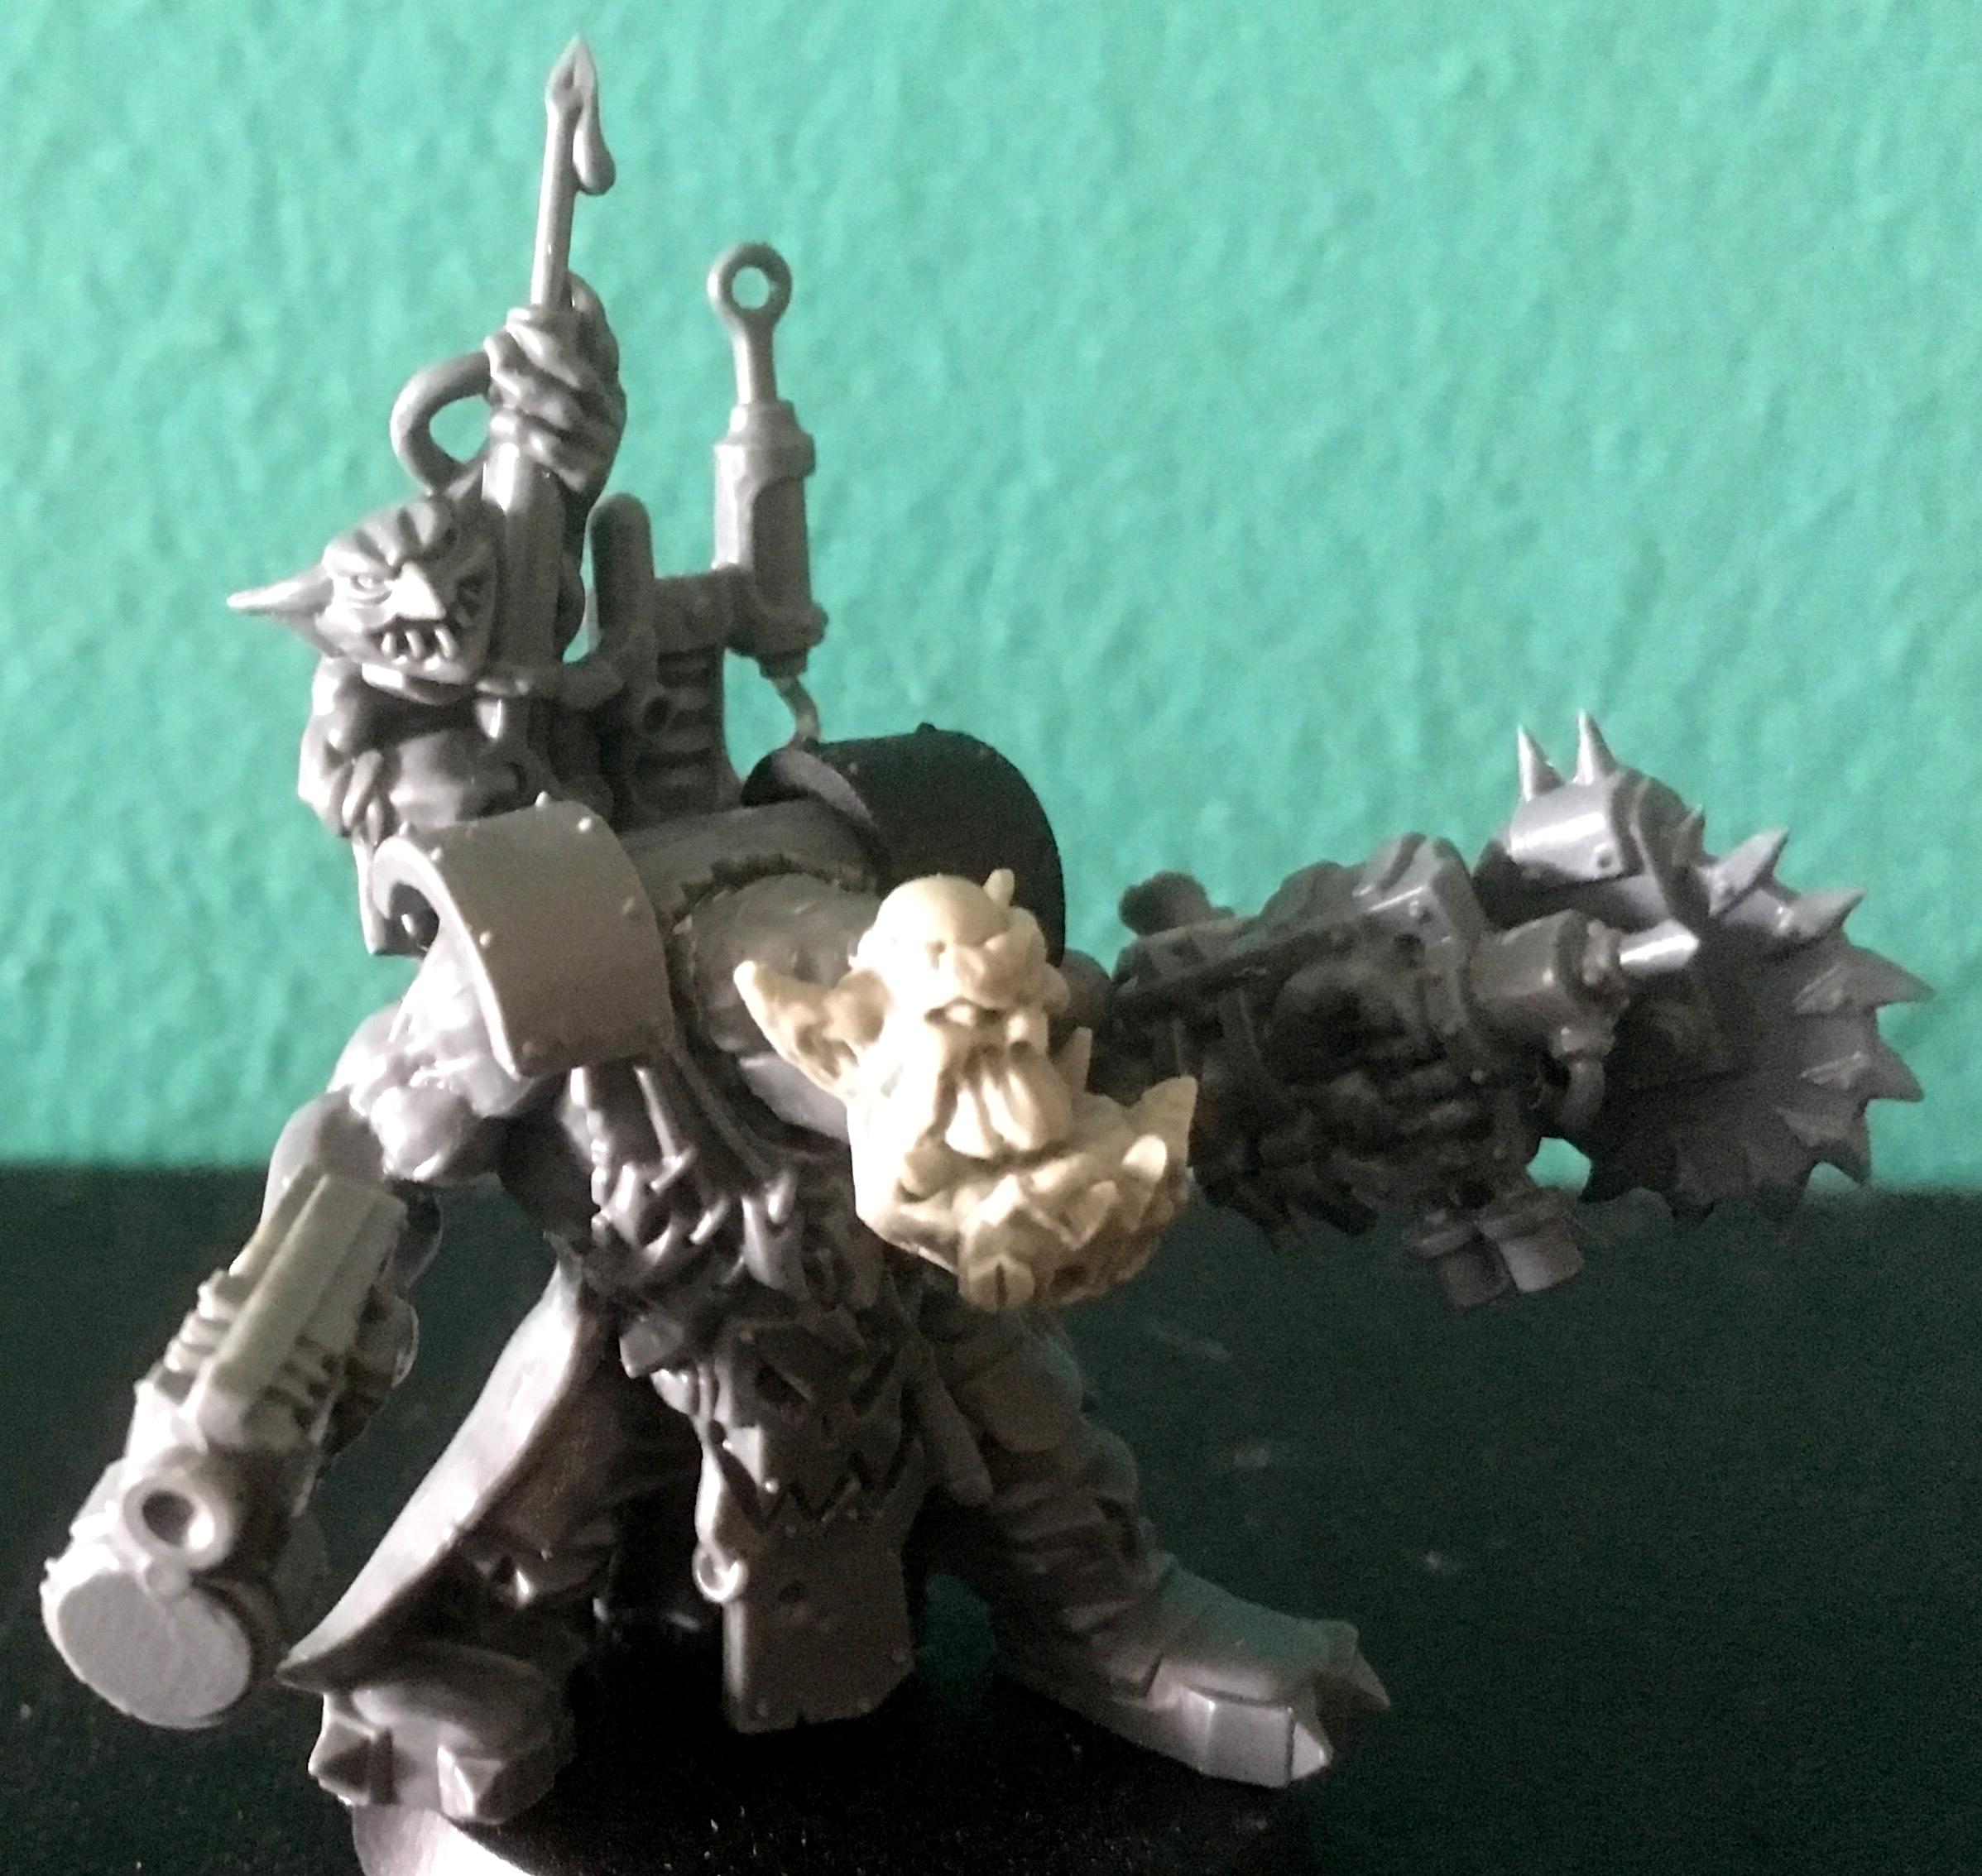 Orks, Counts as Grotsnik